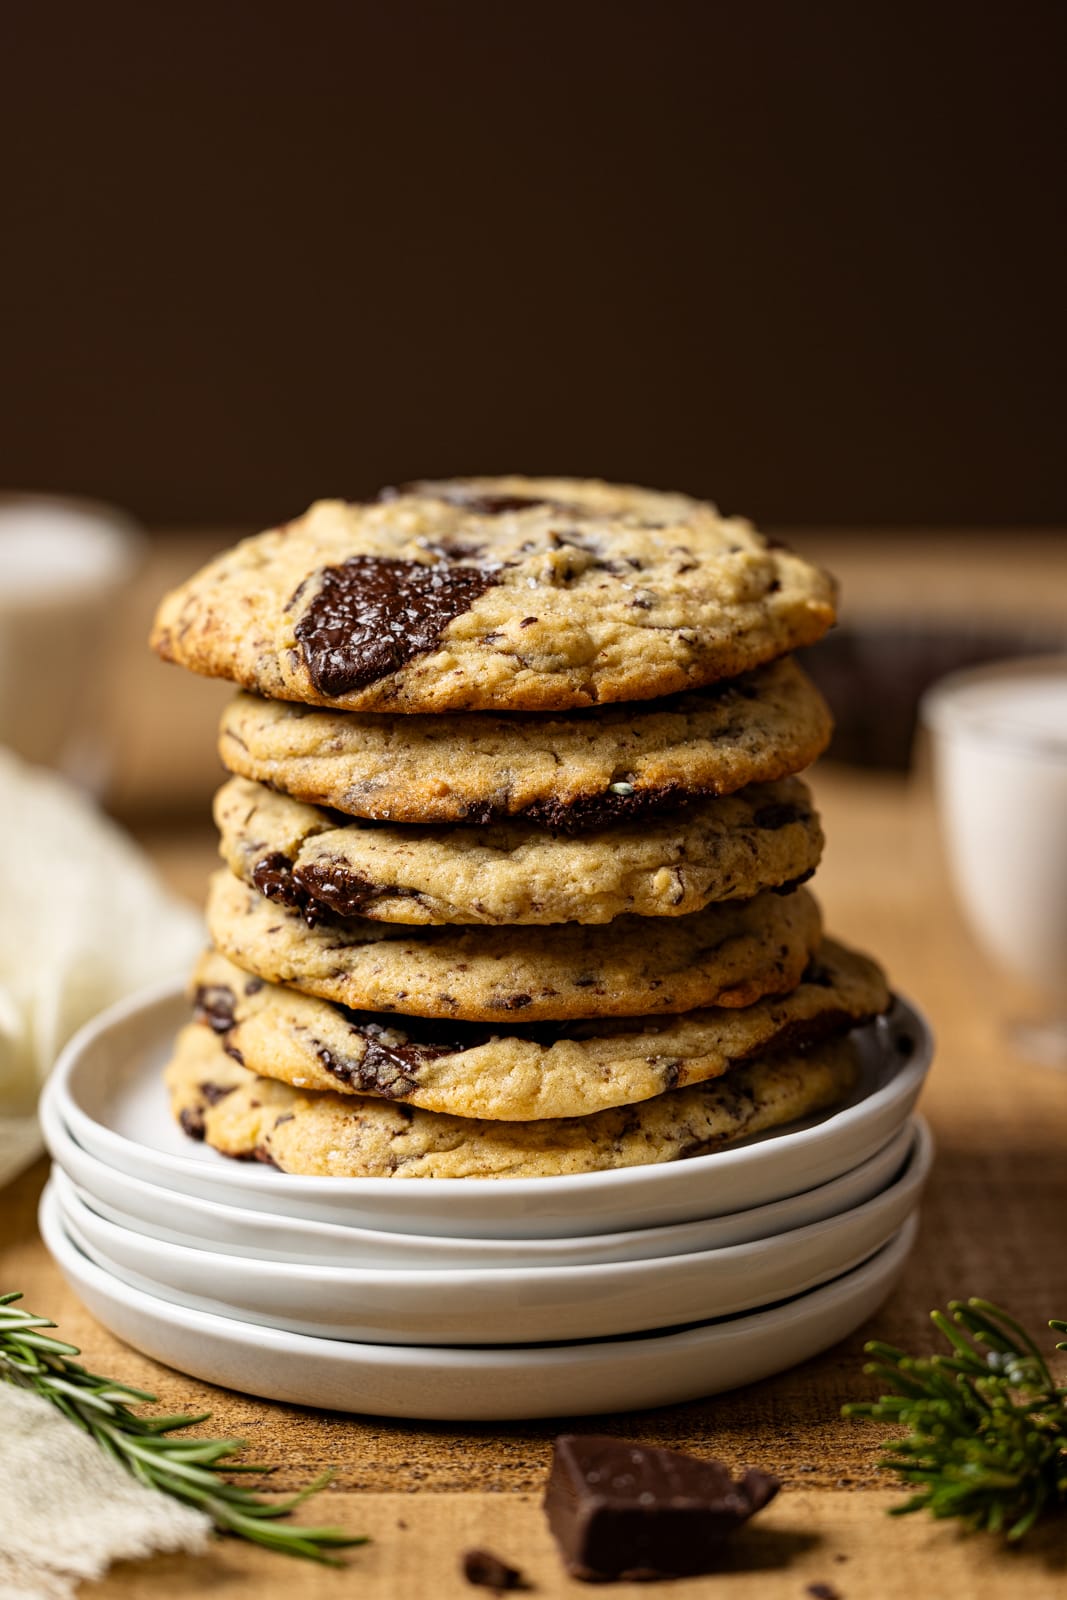 Up close shot of stack of cookies on white plates with a glass of milk in the background.